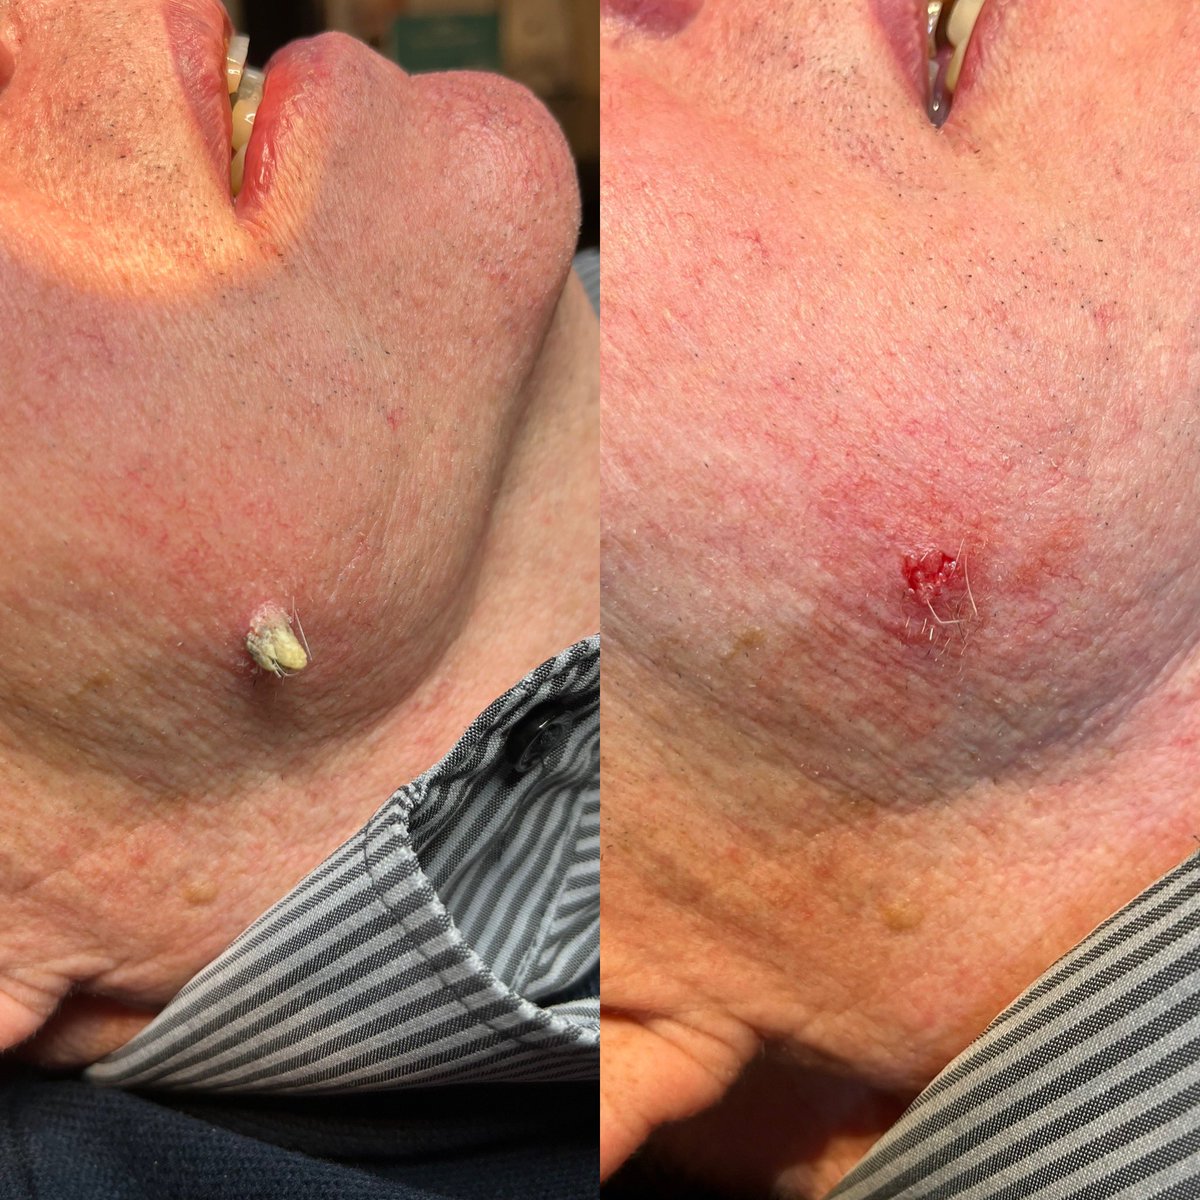 Removed this successfully. 
Got any skin lesions you would like removed?
#advancedskincare
#halcyondaysskincare
#advancedelectrolysis